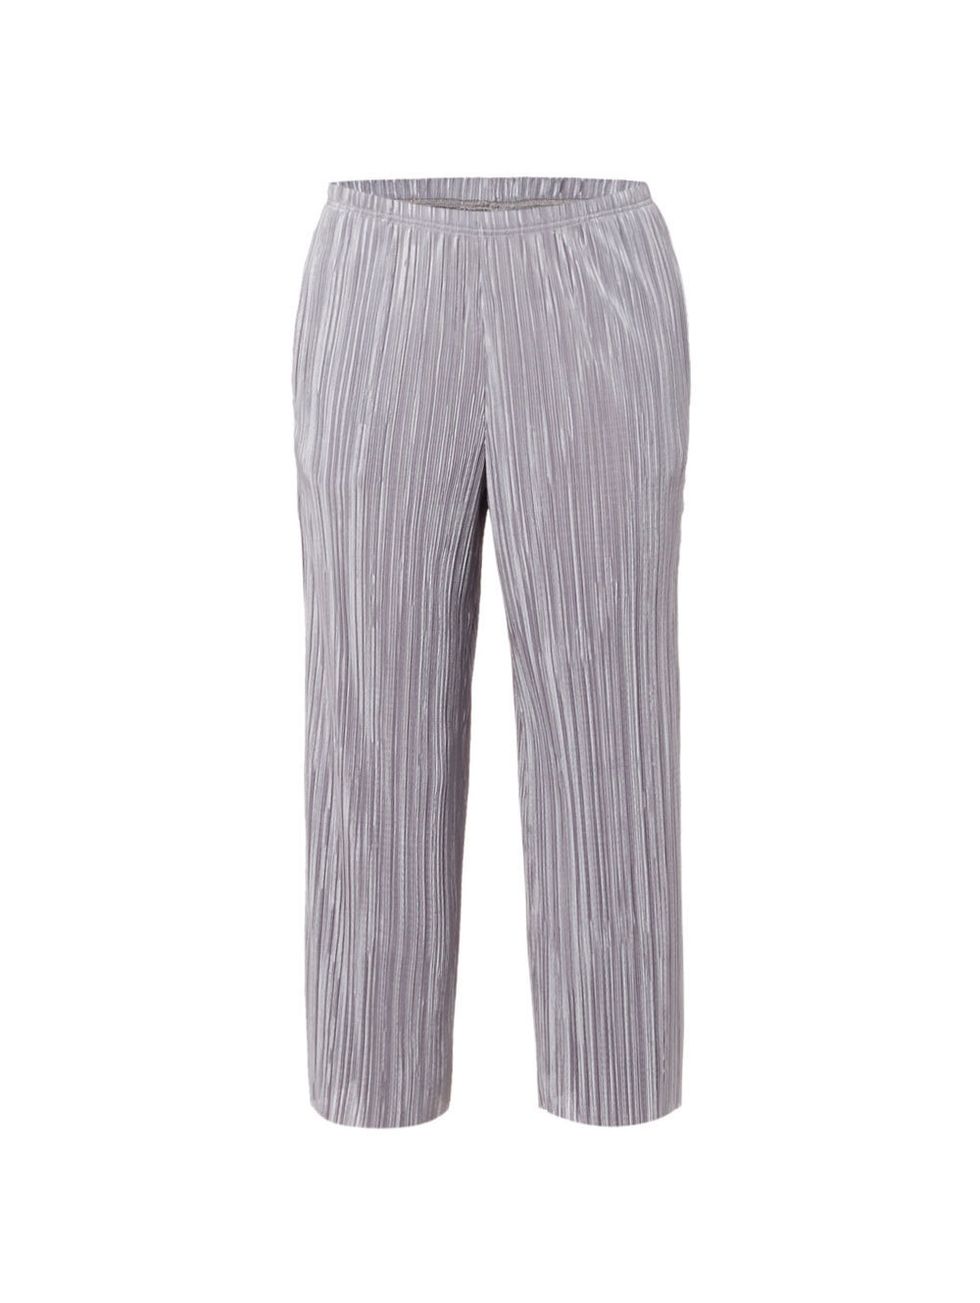 Grey, Elephants and Mammoths, Violet, Elephant, Active pants, Woolen, Tights, Suit trousers, Working animal, 